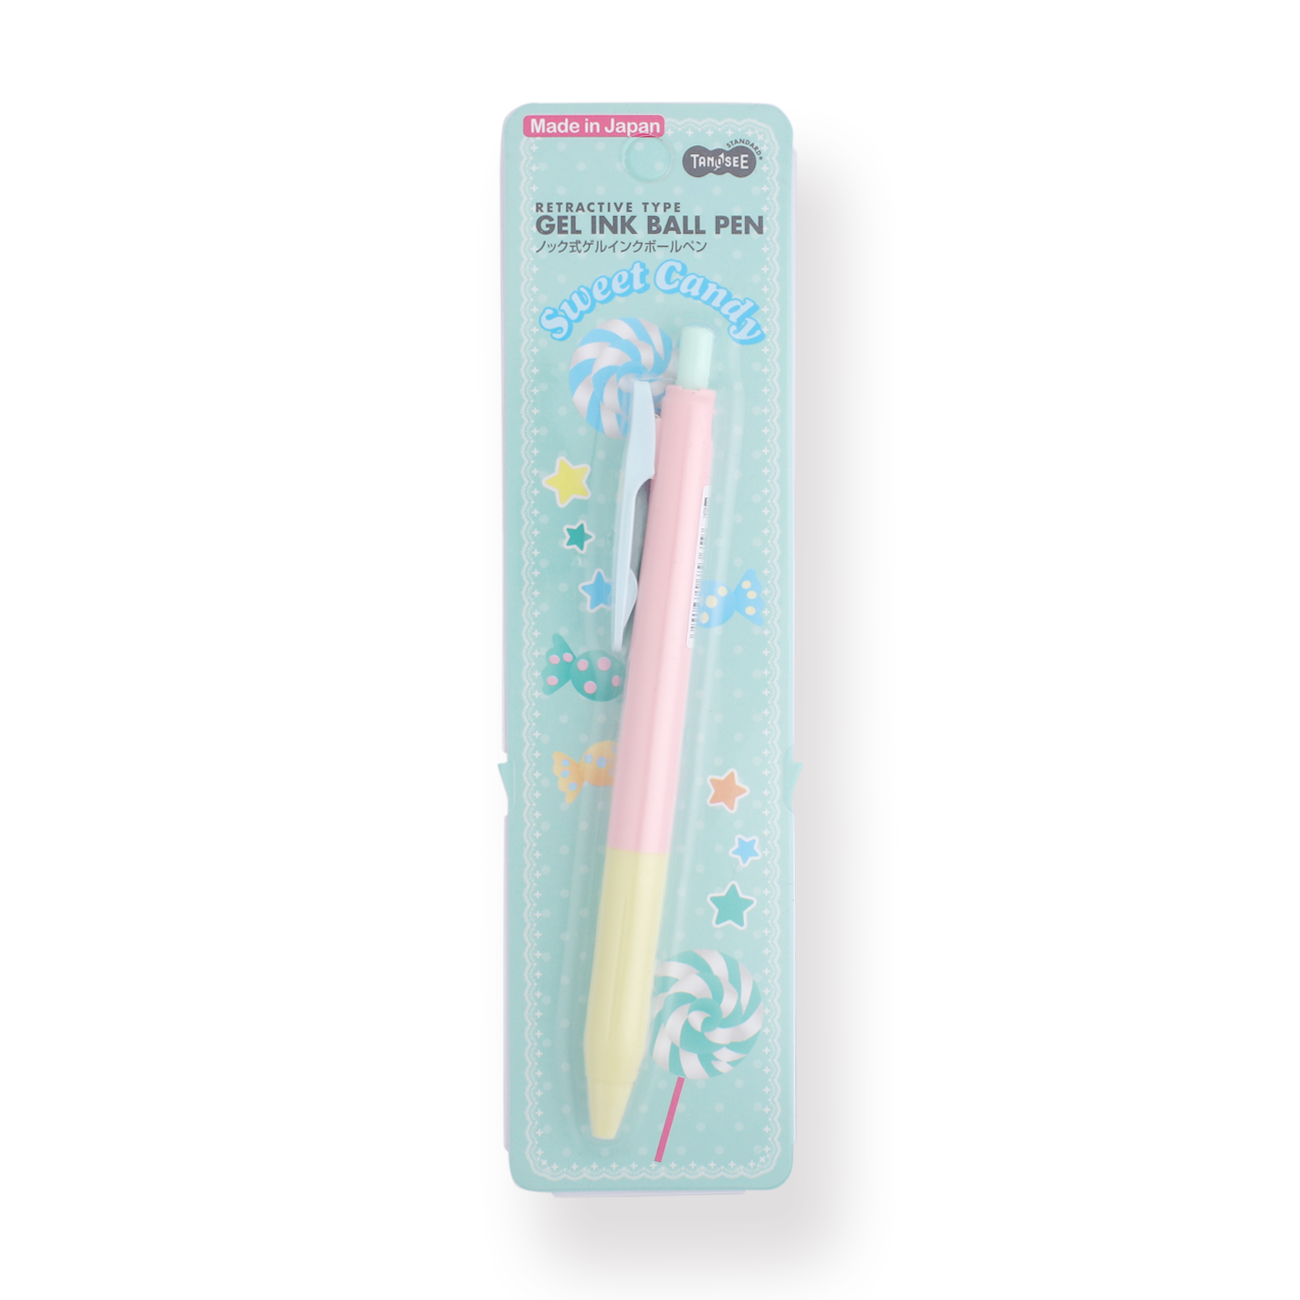 Zebra Sarasa x Tanosee Retractive Type Gel Pen - 0.5 mm - Sweet Candy - Blue Clip - Stationery Pal